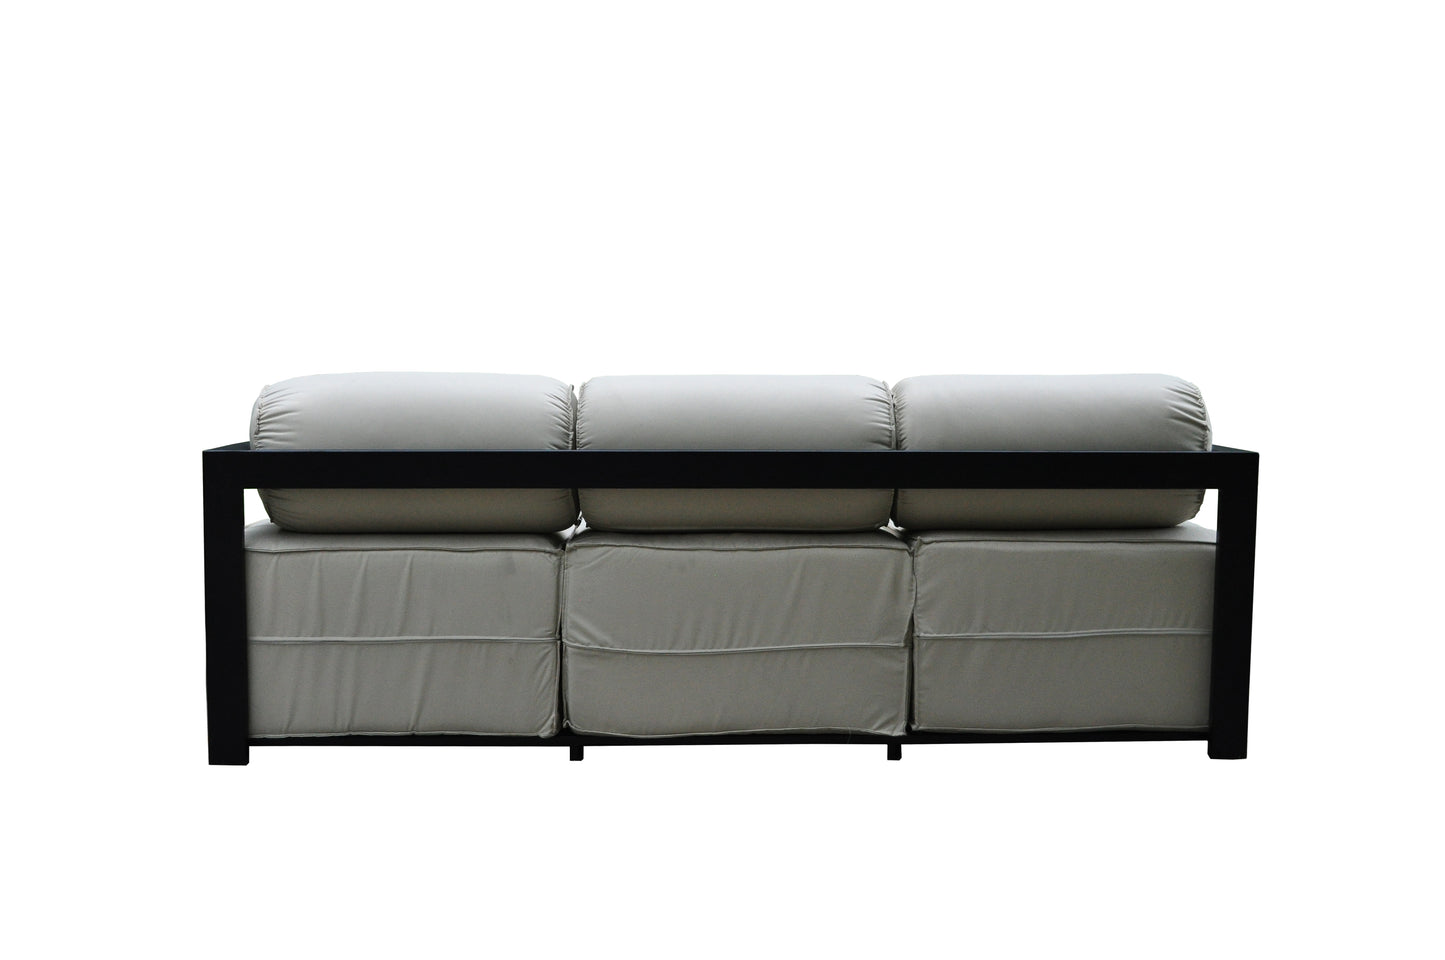 Volantes Outdoor 3-Piece Sofa, Loveseat, and Chair Set